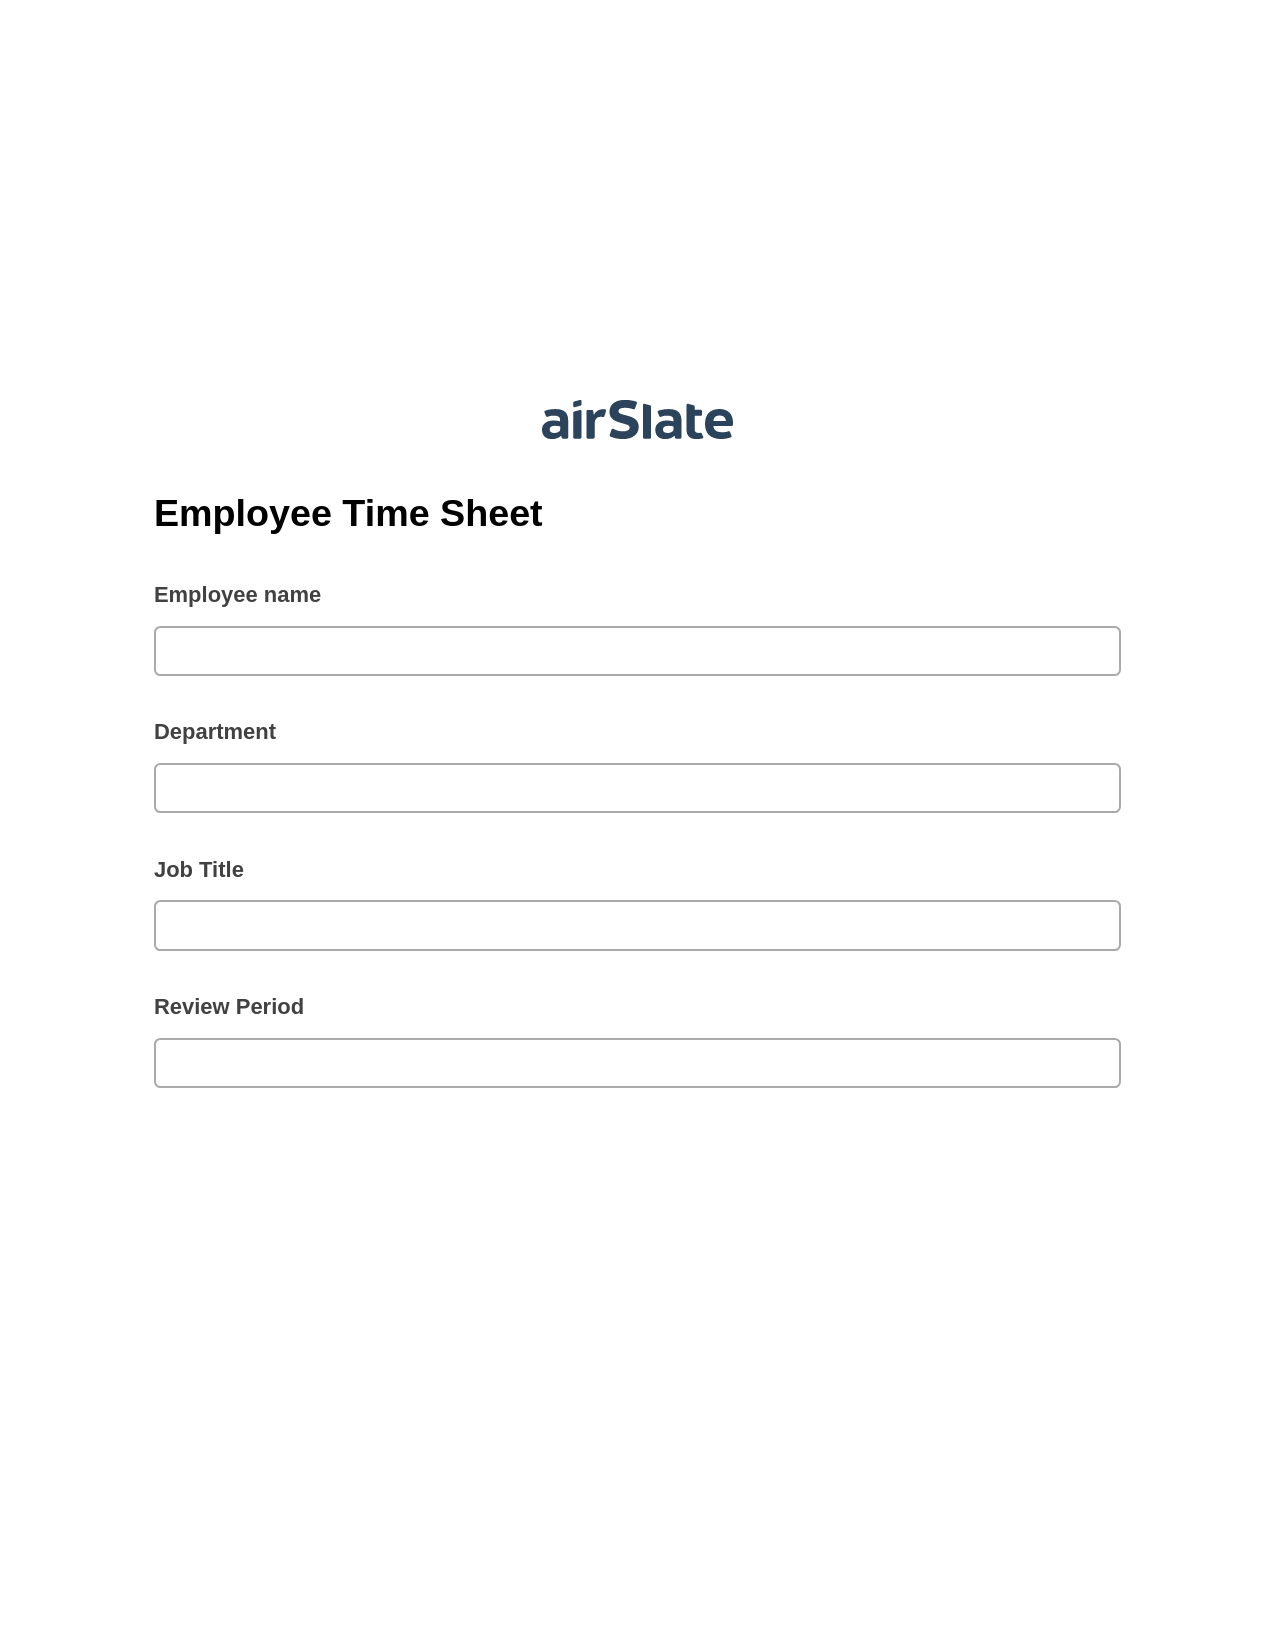 Employee Time Sheet Pre-fill from Google Sheets Bot, Create Salesforce Records Bot, Archive to SharePoint Folder Bot